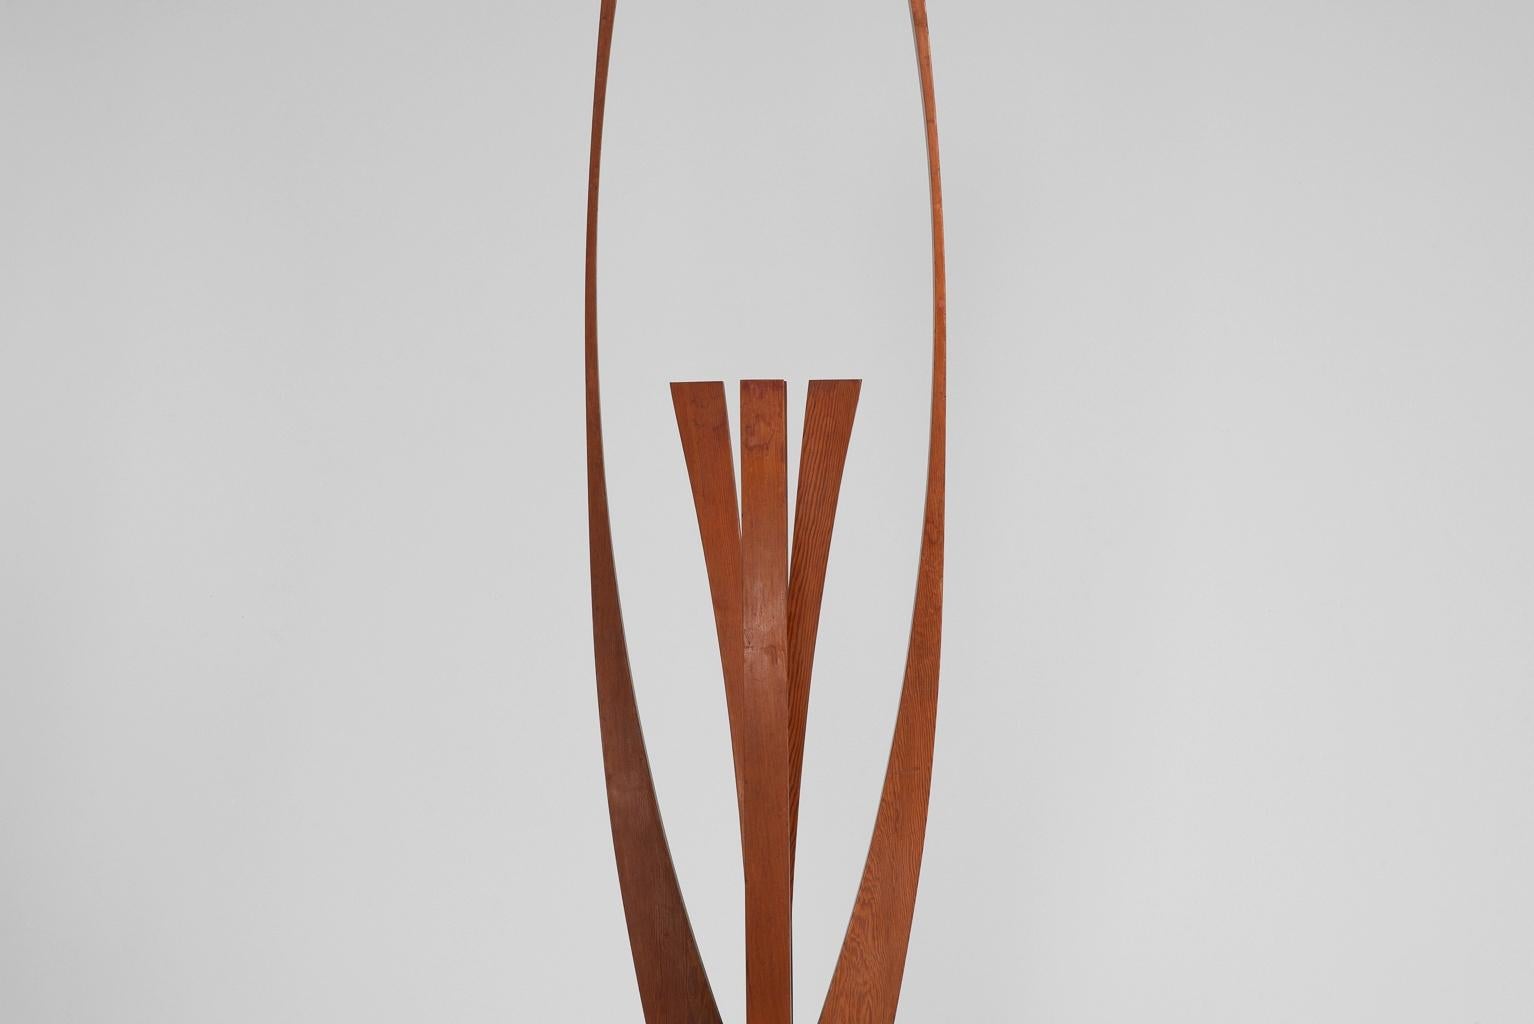 This monumental-sized sculpture by Frans Hermes, is a true modern work of art, from the1970s. It is made from solid pine wood with great patina, giving it a unique and weathered appearance. The sculpture stands on a base that has been refinished in